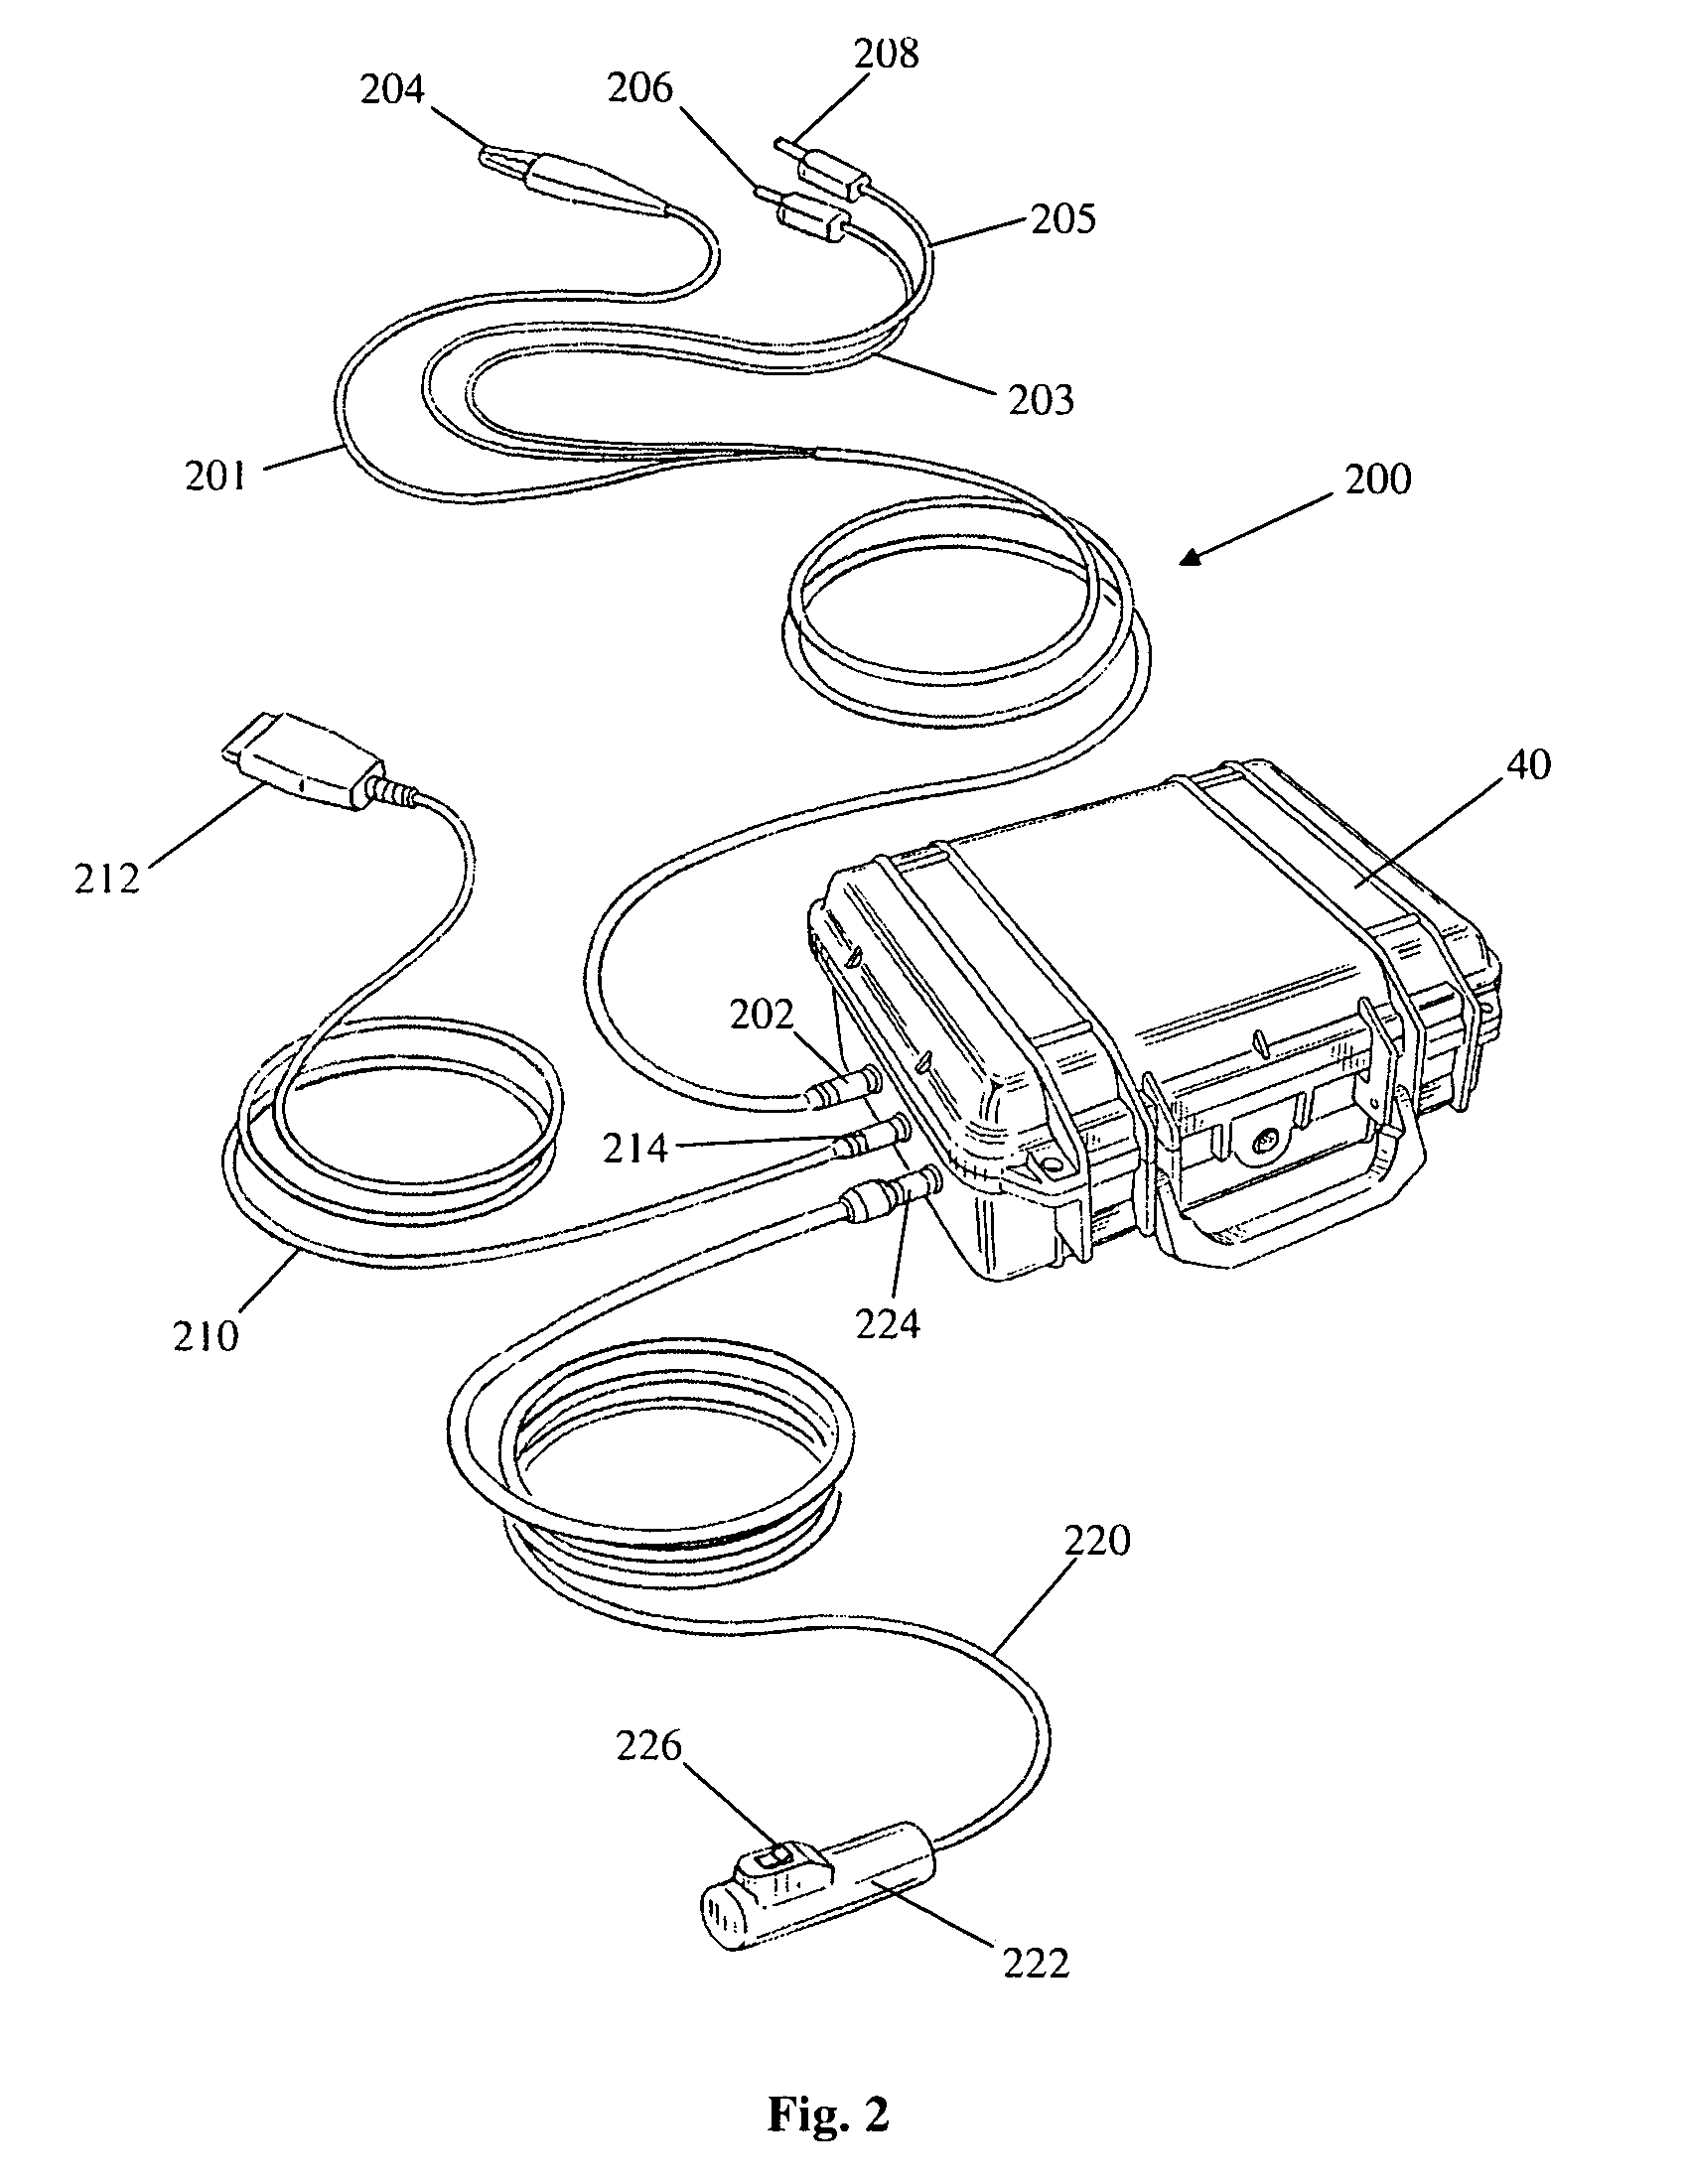 Device for activating a vehicle odometer using an external power source